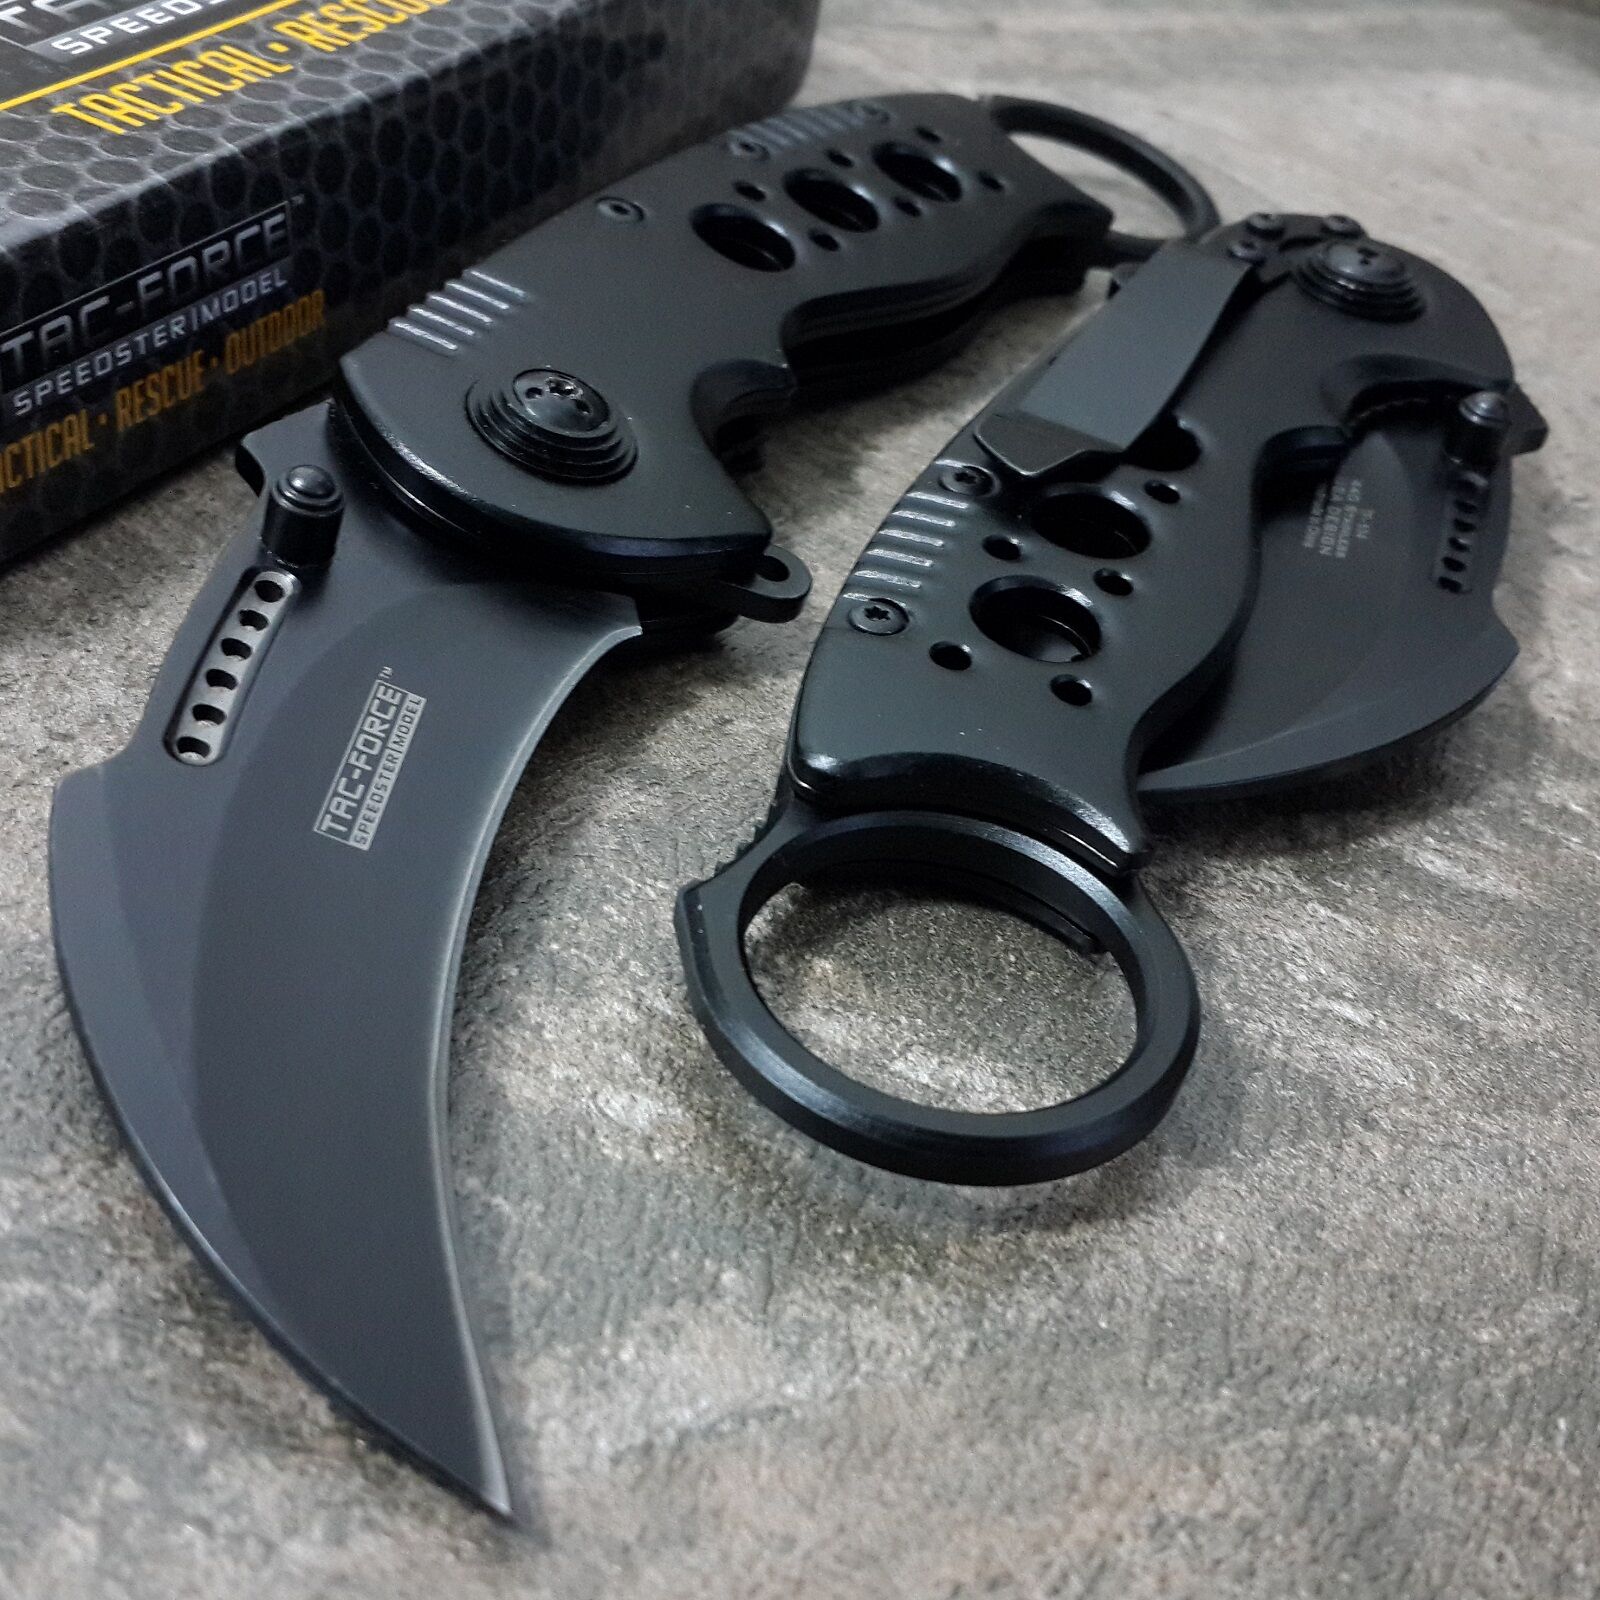 BLACK KARAMBIT SPRING POCKET KNIFE Tactical Open Folding Claw Assisted Blade EDC